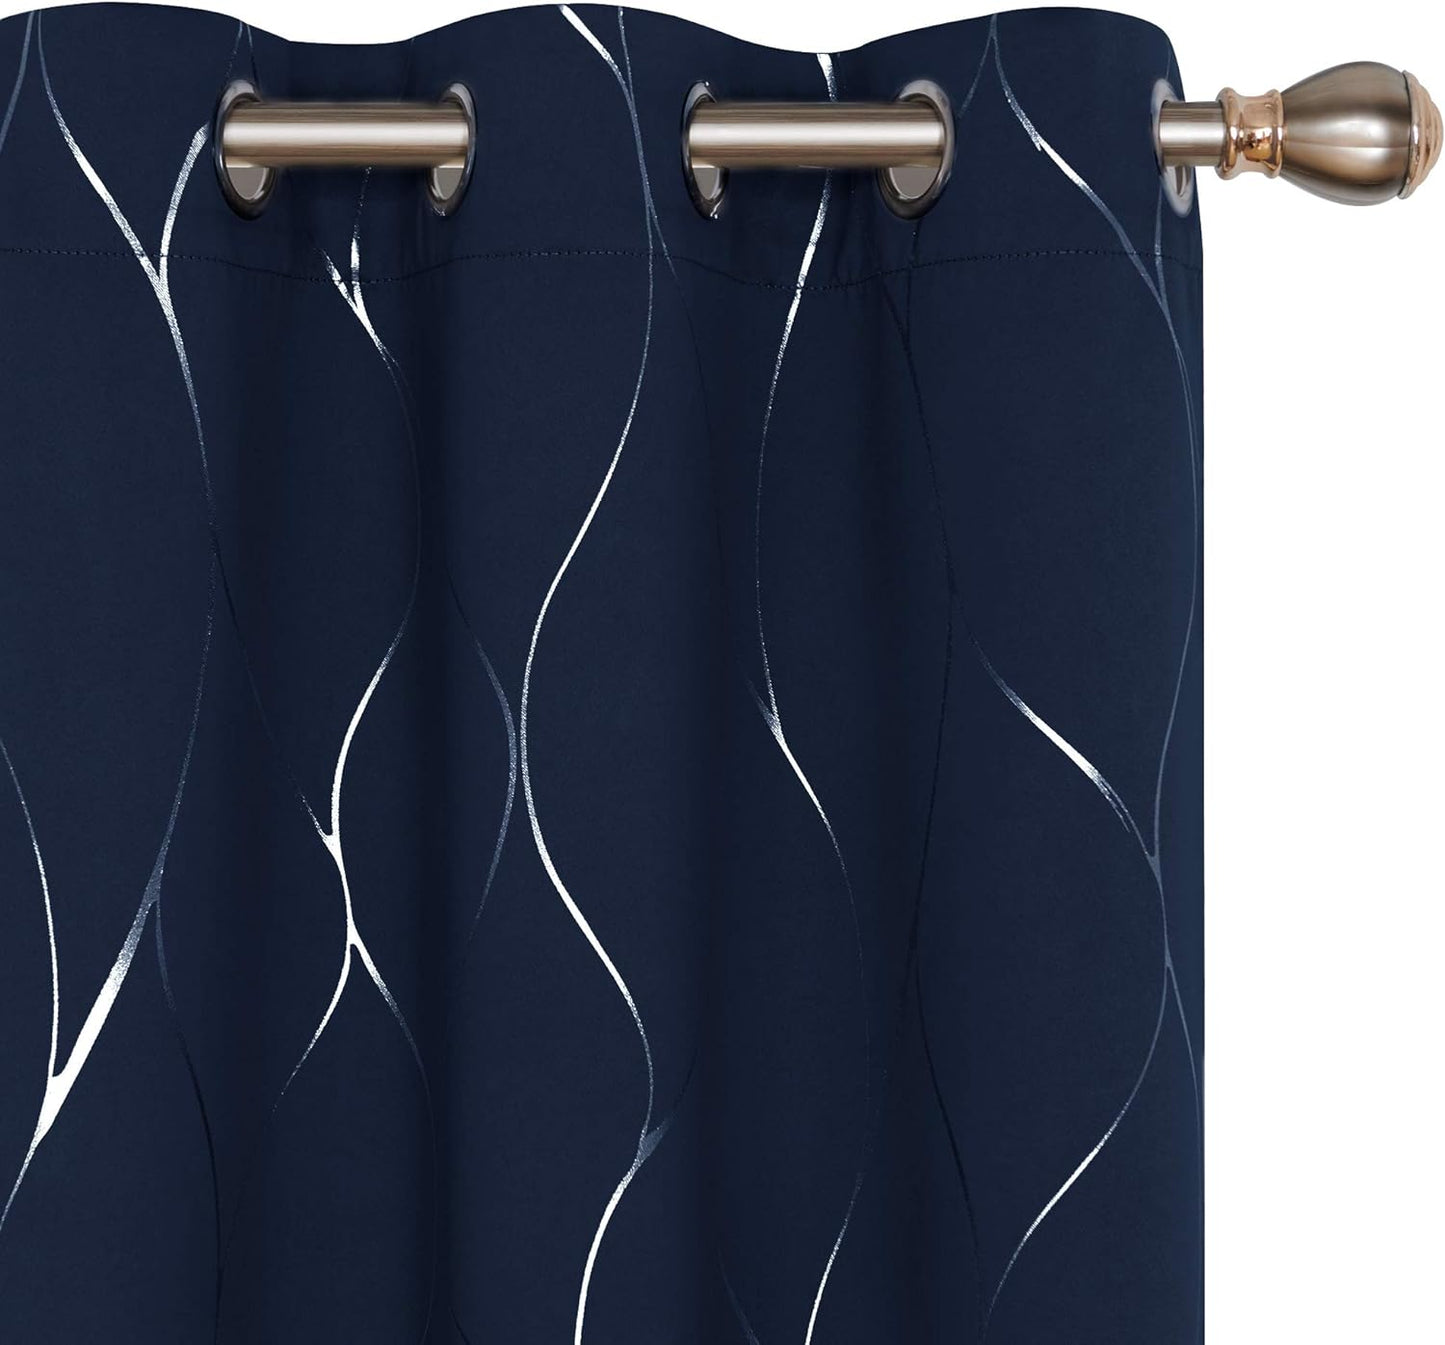 Deconovo Blackout Curtains with Foil Wave Pattern, Grommet Curtain Room Darkening Window Panels, Thermal Insulated Curtain Drapes for Nursery Room (42W X 54L Inch, 2 Panels, Turquoise)  DECONOVO Navy Blue W42 X L108 